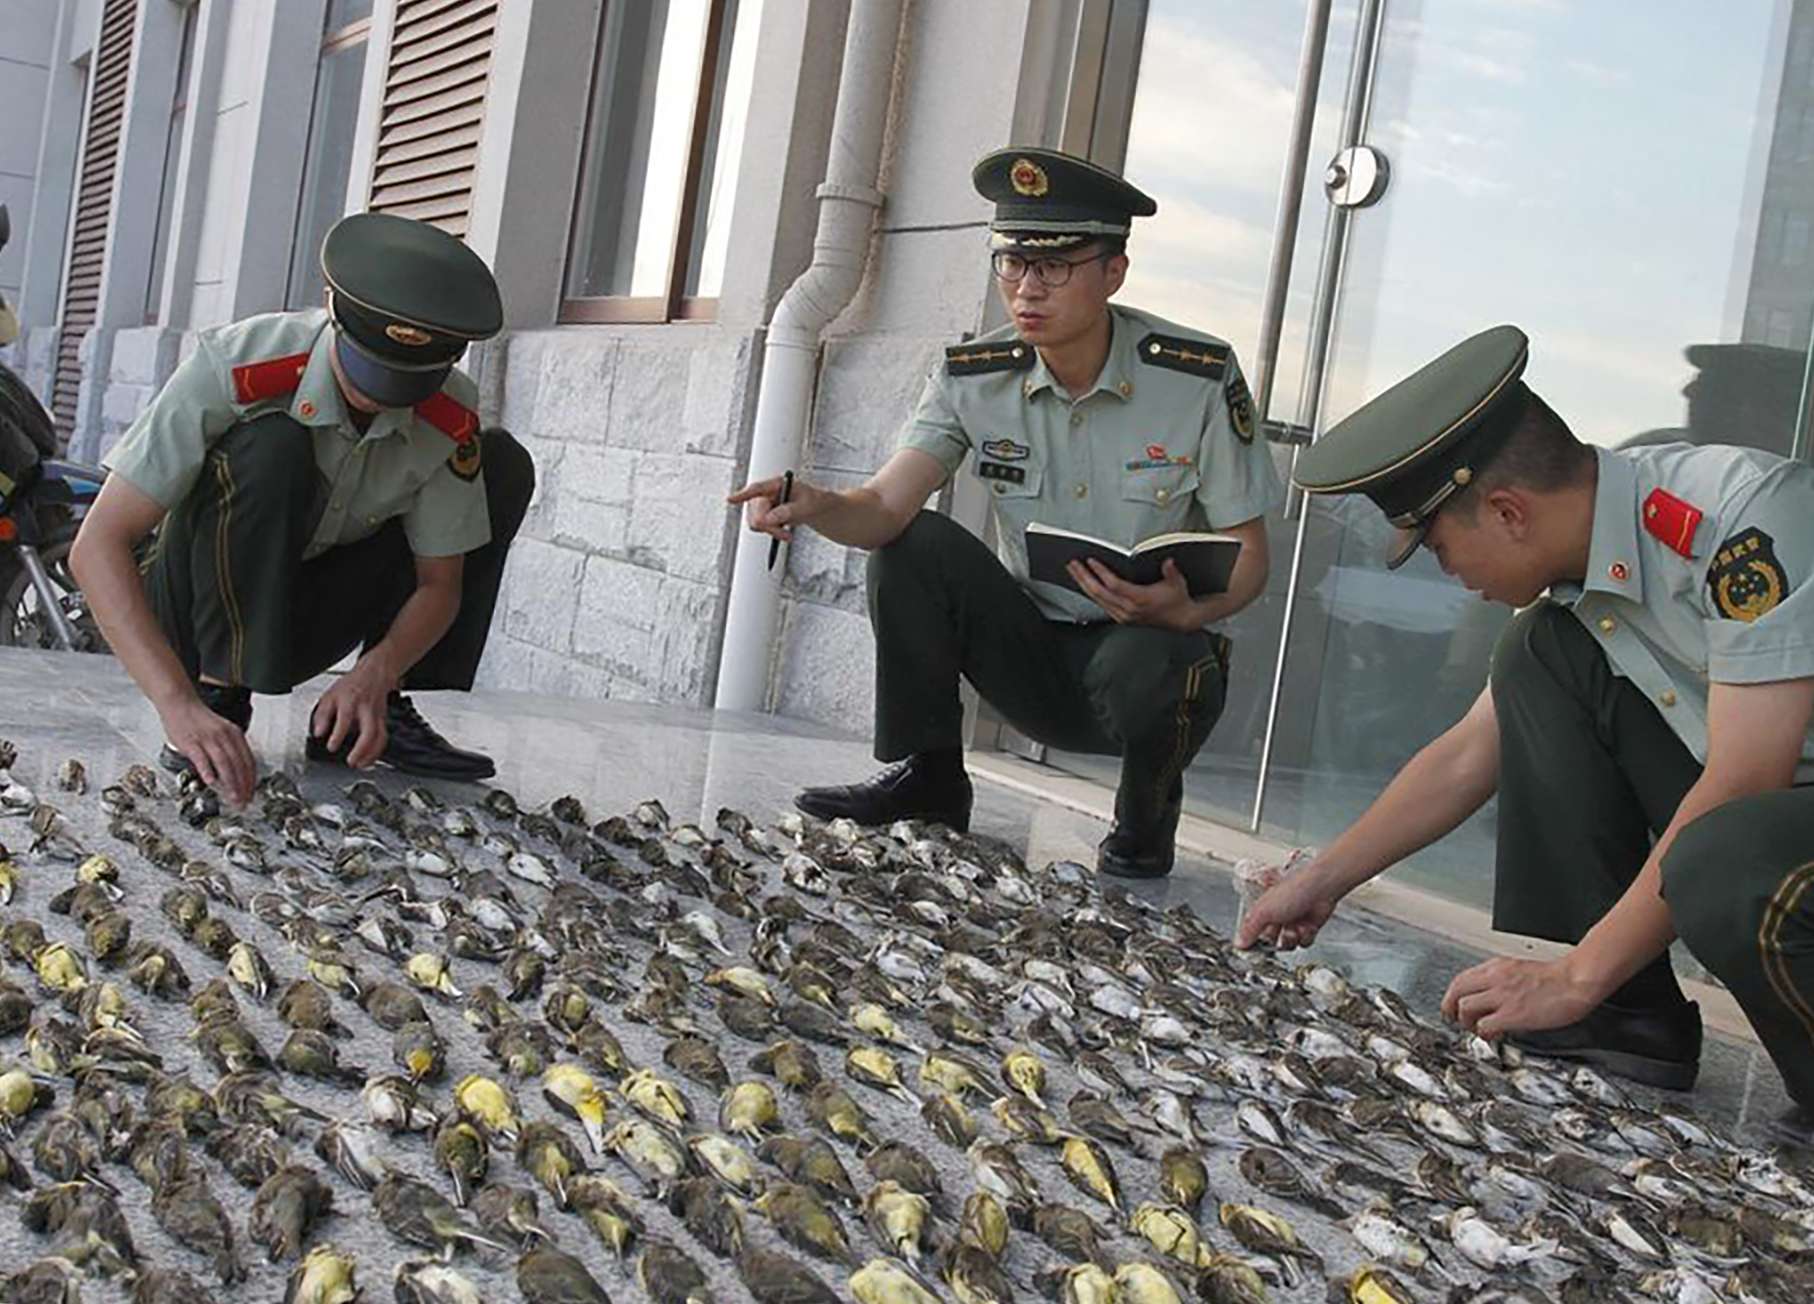 Police count the poisoned birds. Photo: SCMP Pictures